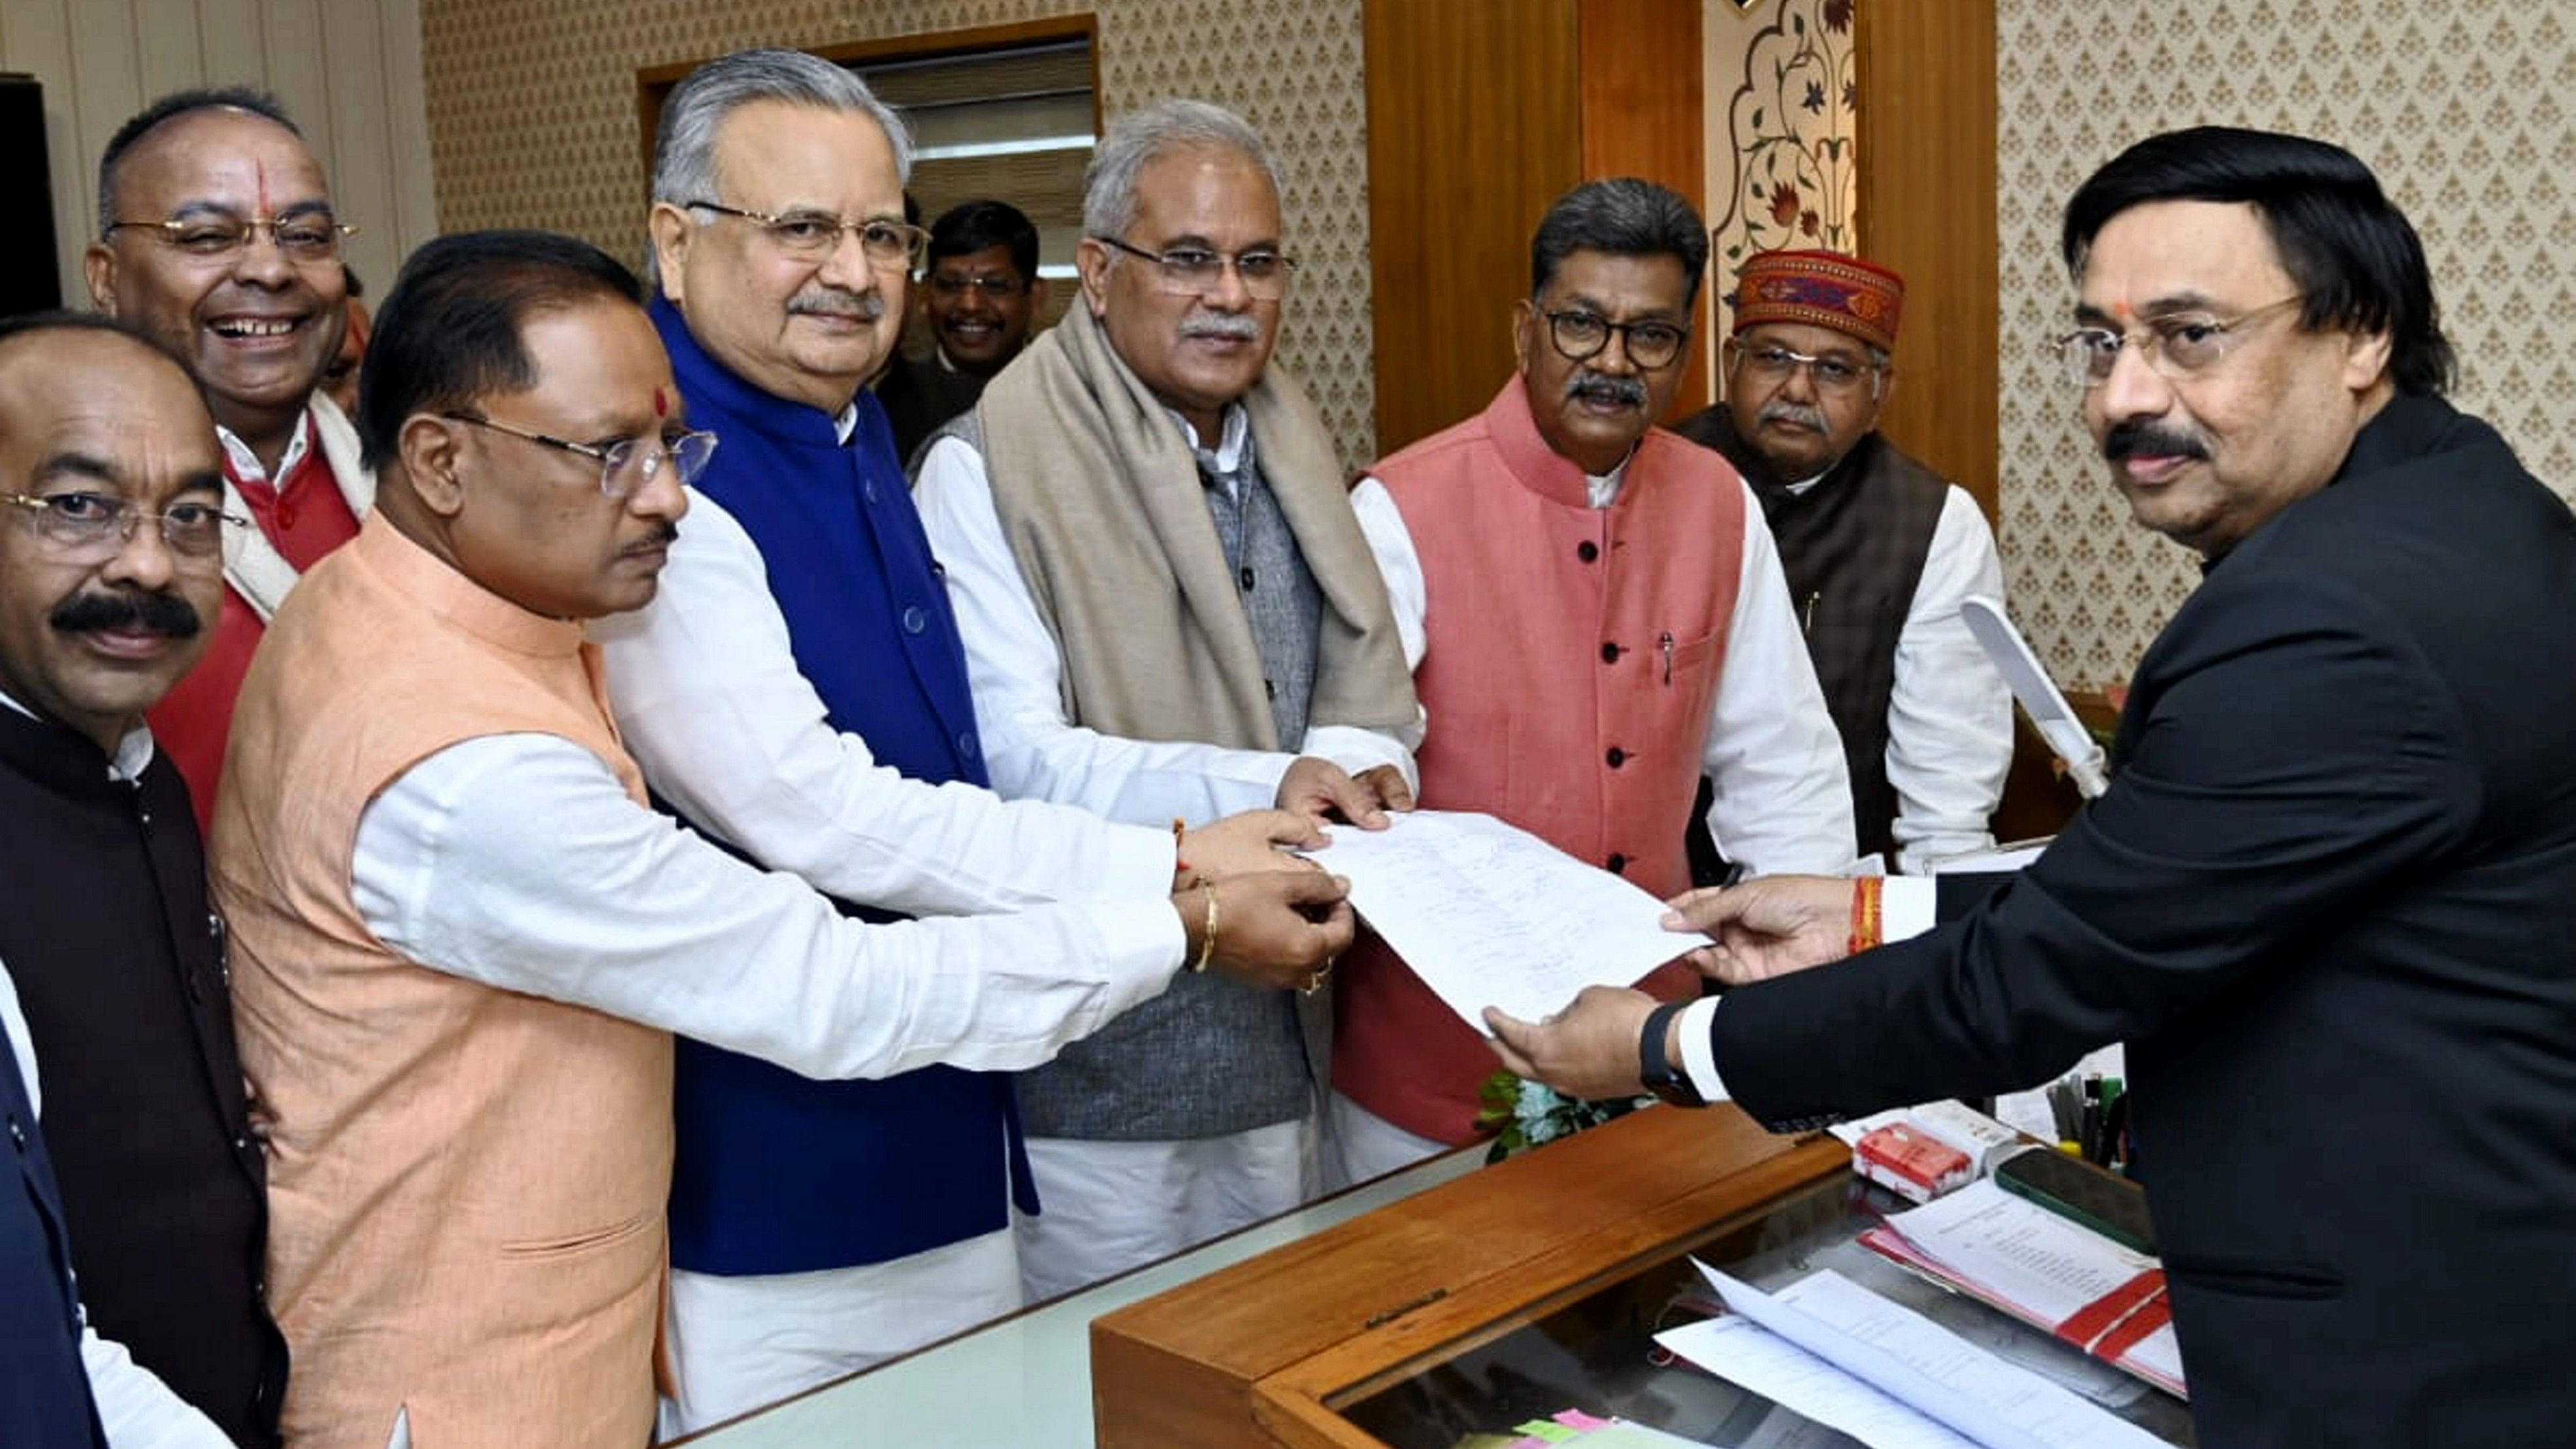 <div class="paragraphs"><p> BJP leader Raman Singh with Chhattisgarh Chief Minister Vishnu Deo Sai and former CM Bhupesh Baghel submits his nomination papers for the post of State Assembly Speaker to Secretary Dinesh Sharma, in Raipur, Sunday, Dec. 17, 2023. </p></div>